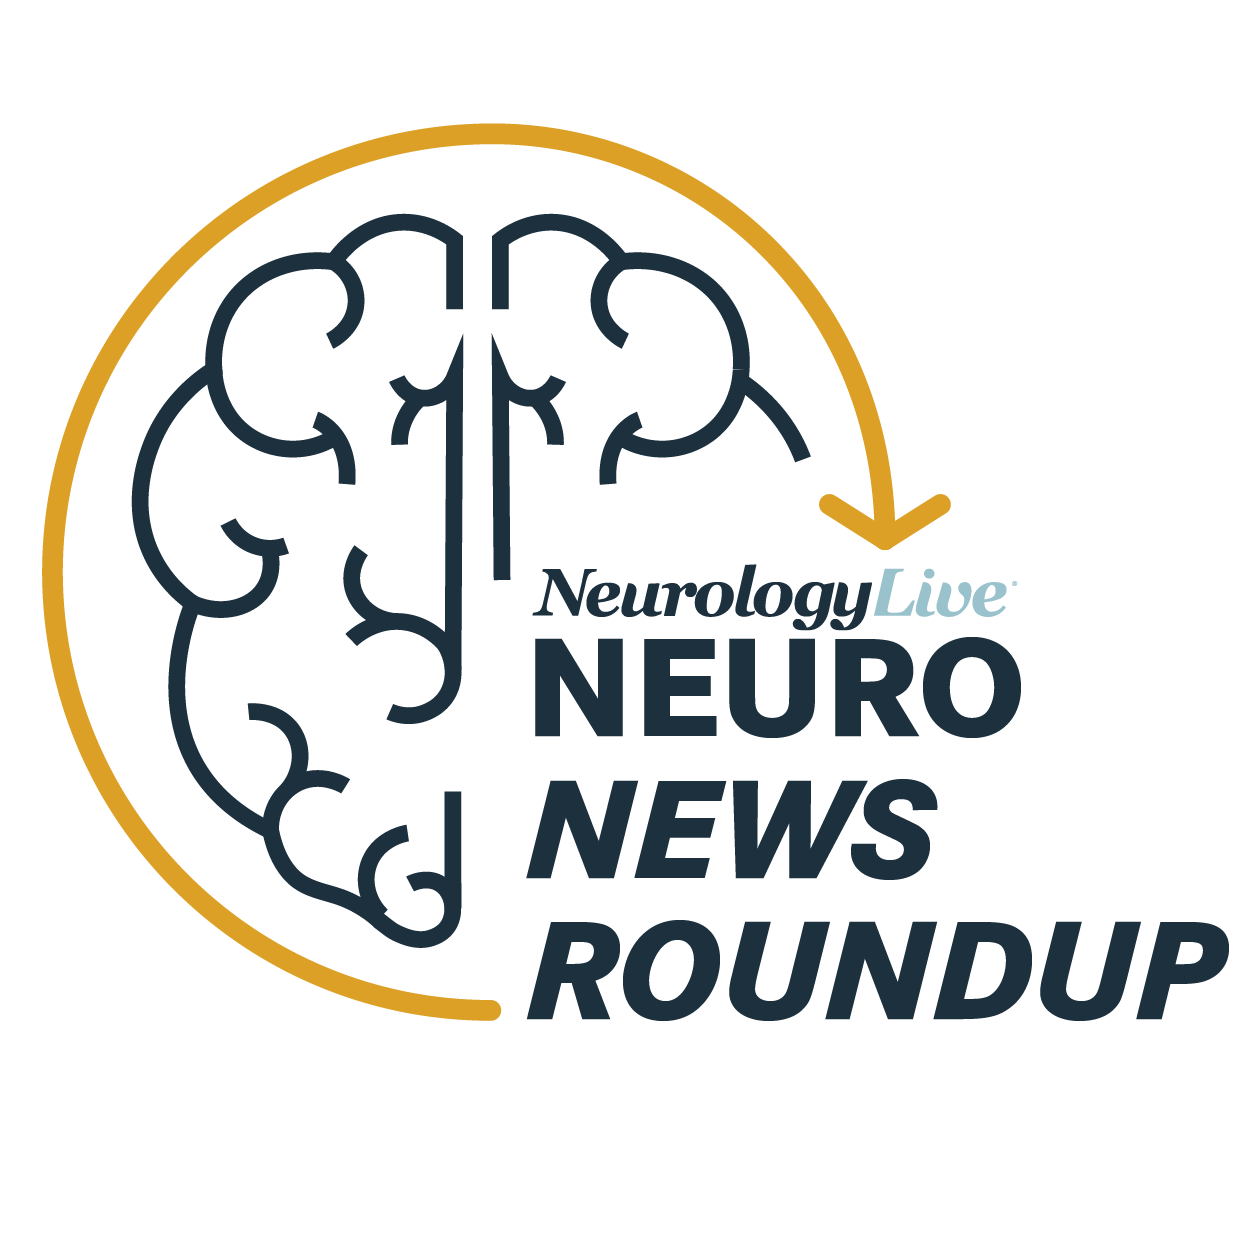 Neuro News Roundup: Hot Topics and Key Insights From Women in Medicine